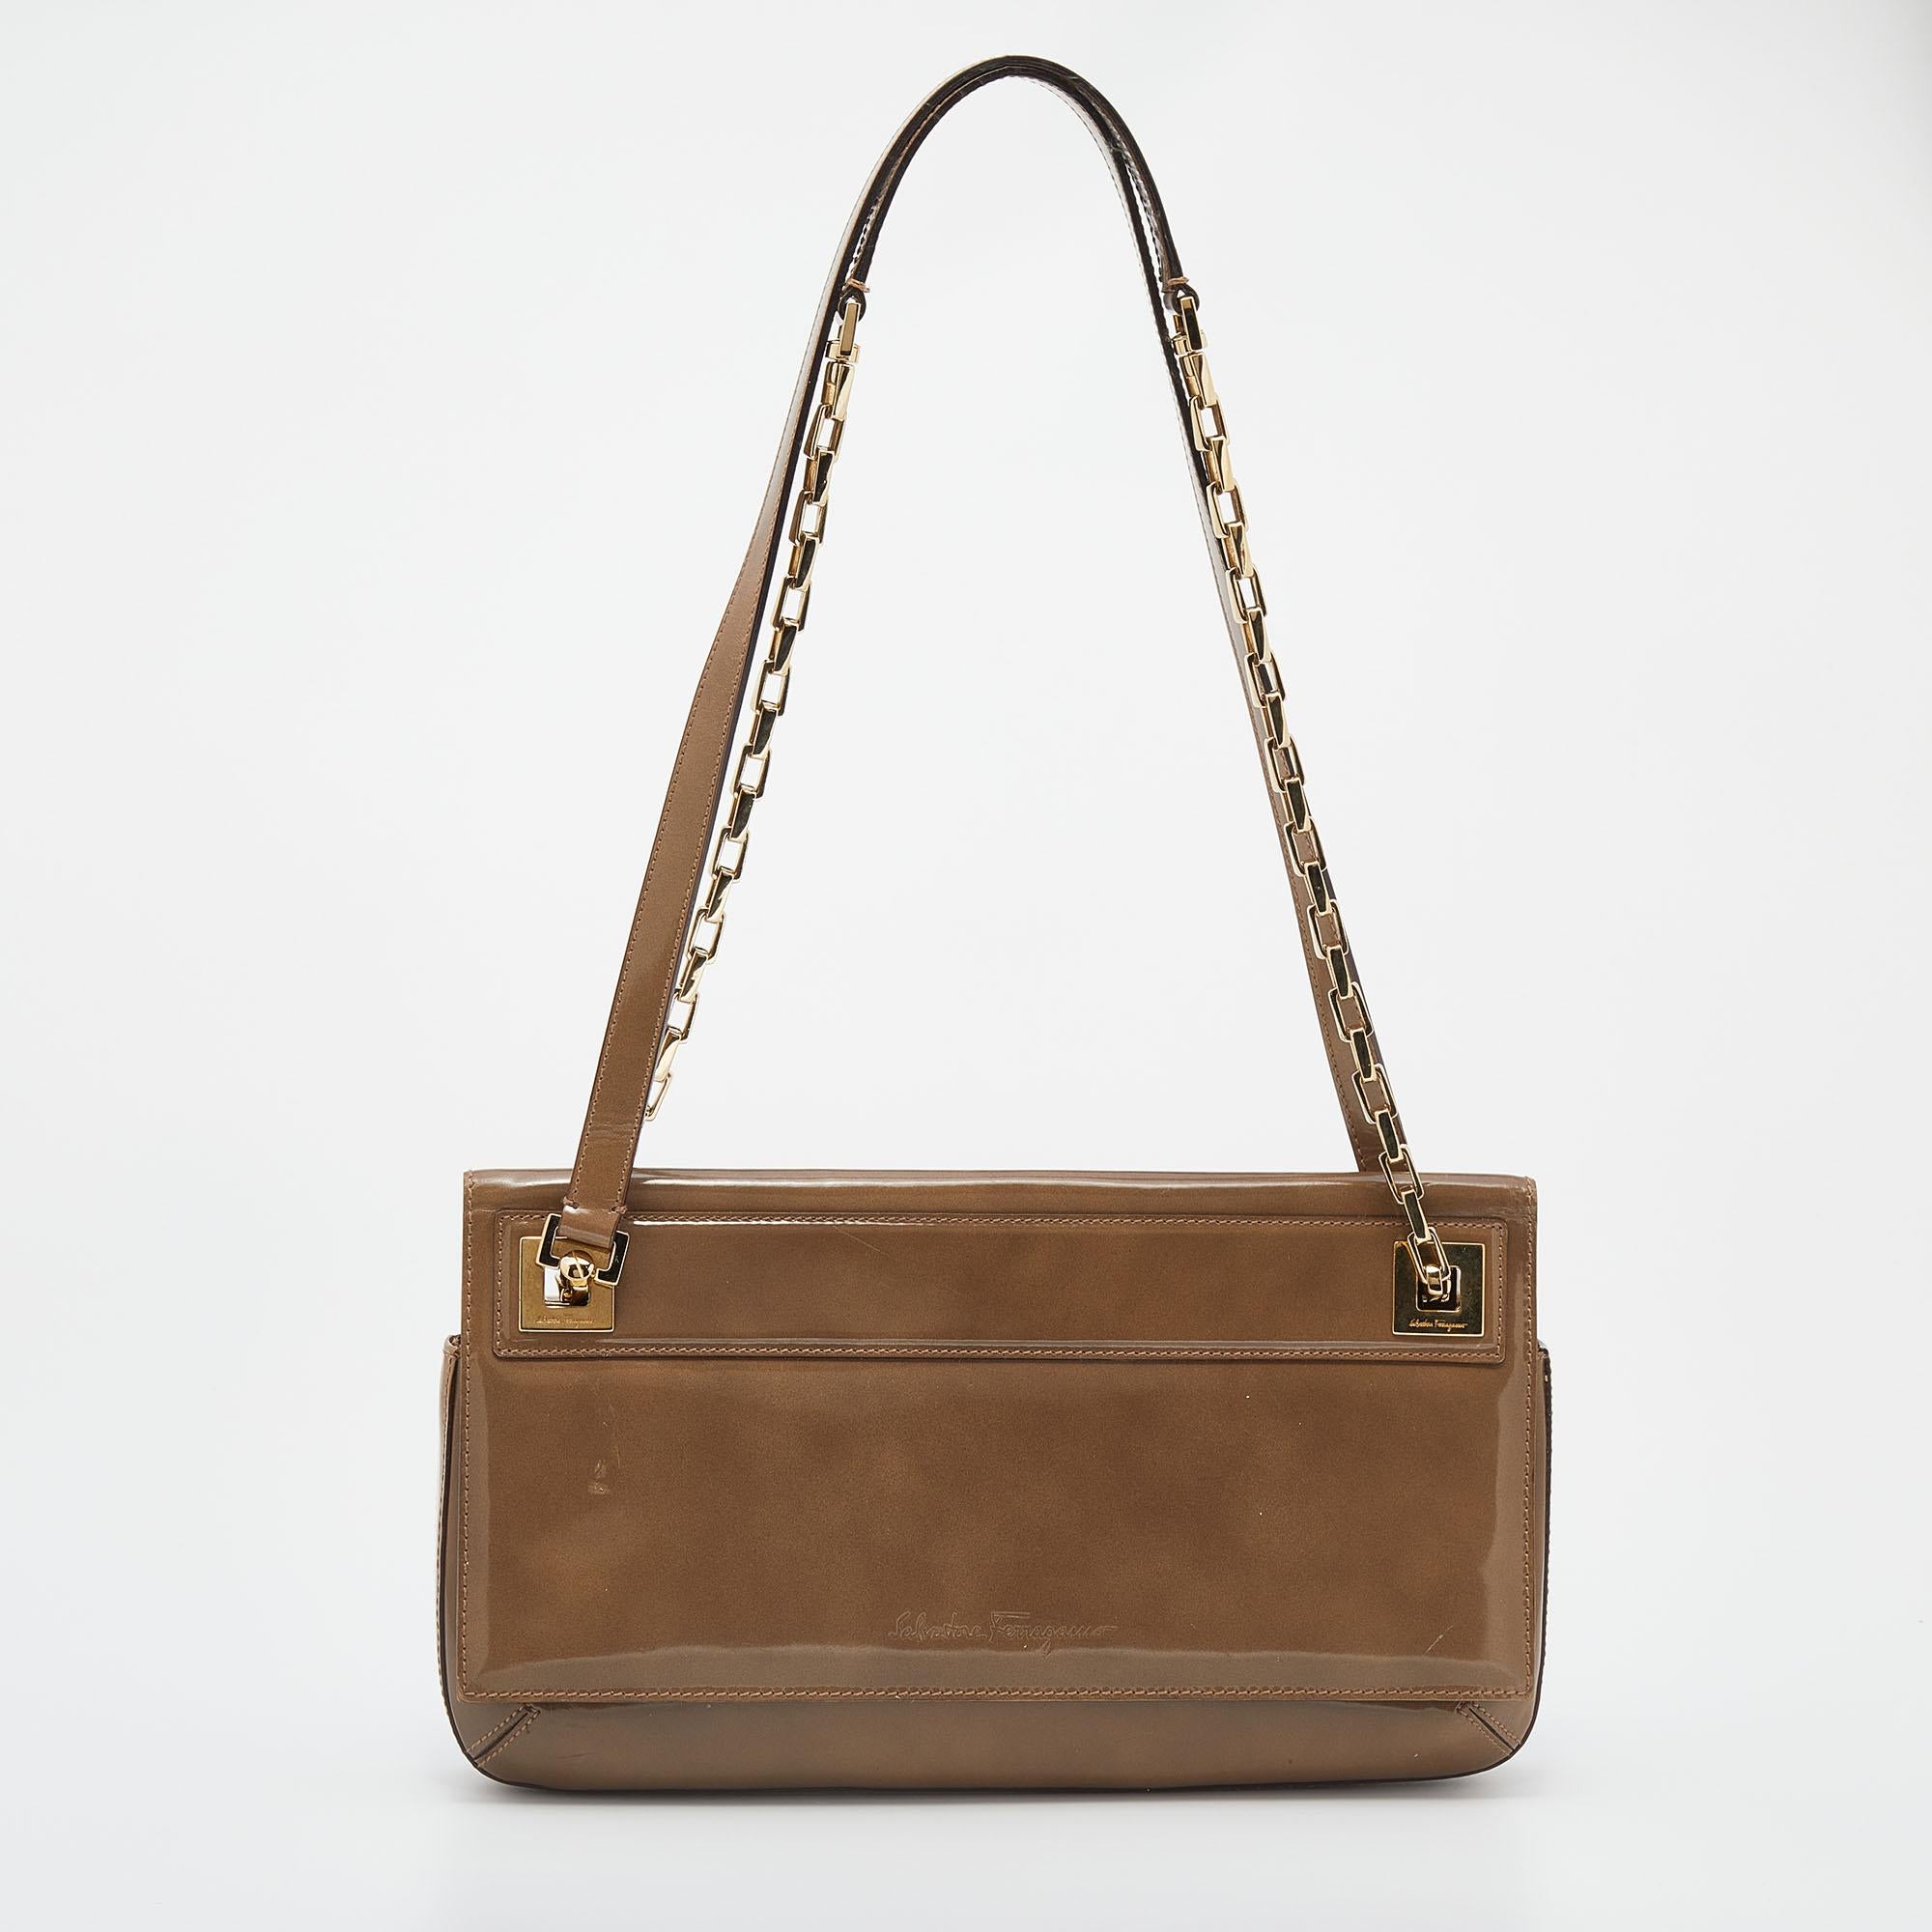 Elegance meets luxury in this shoulder bag from the House of Salvatore Ferragamo. It is created using dark-beige patent leather and has a roomy Alcantara-lined interior, gold-tone hardware, and a 30 cm handle drop. This stunning bag will elevate the